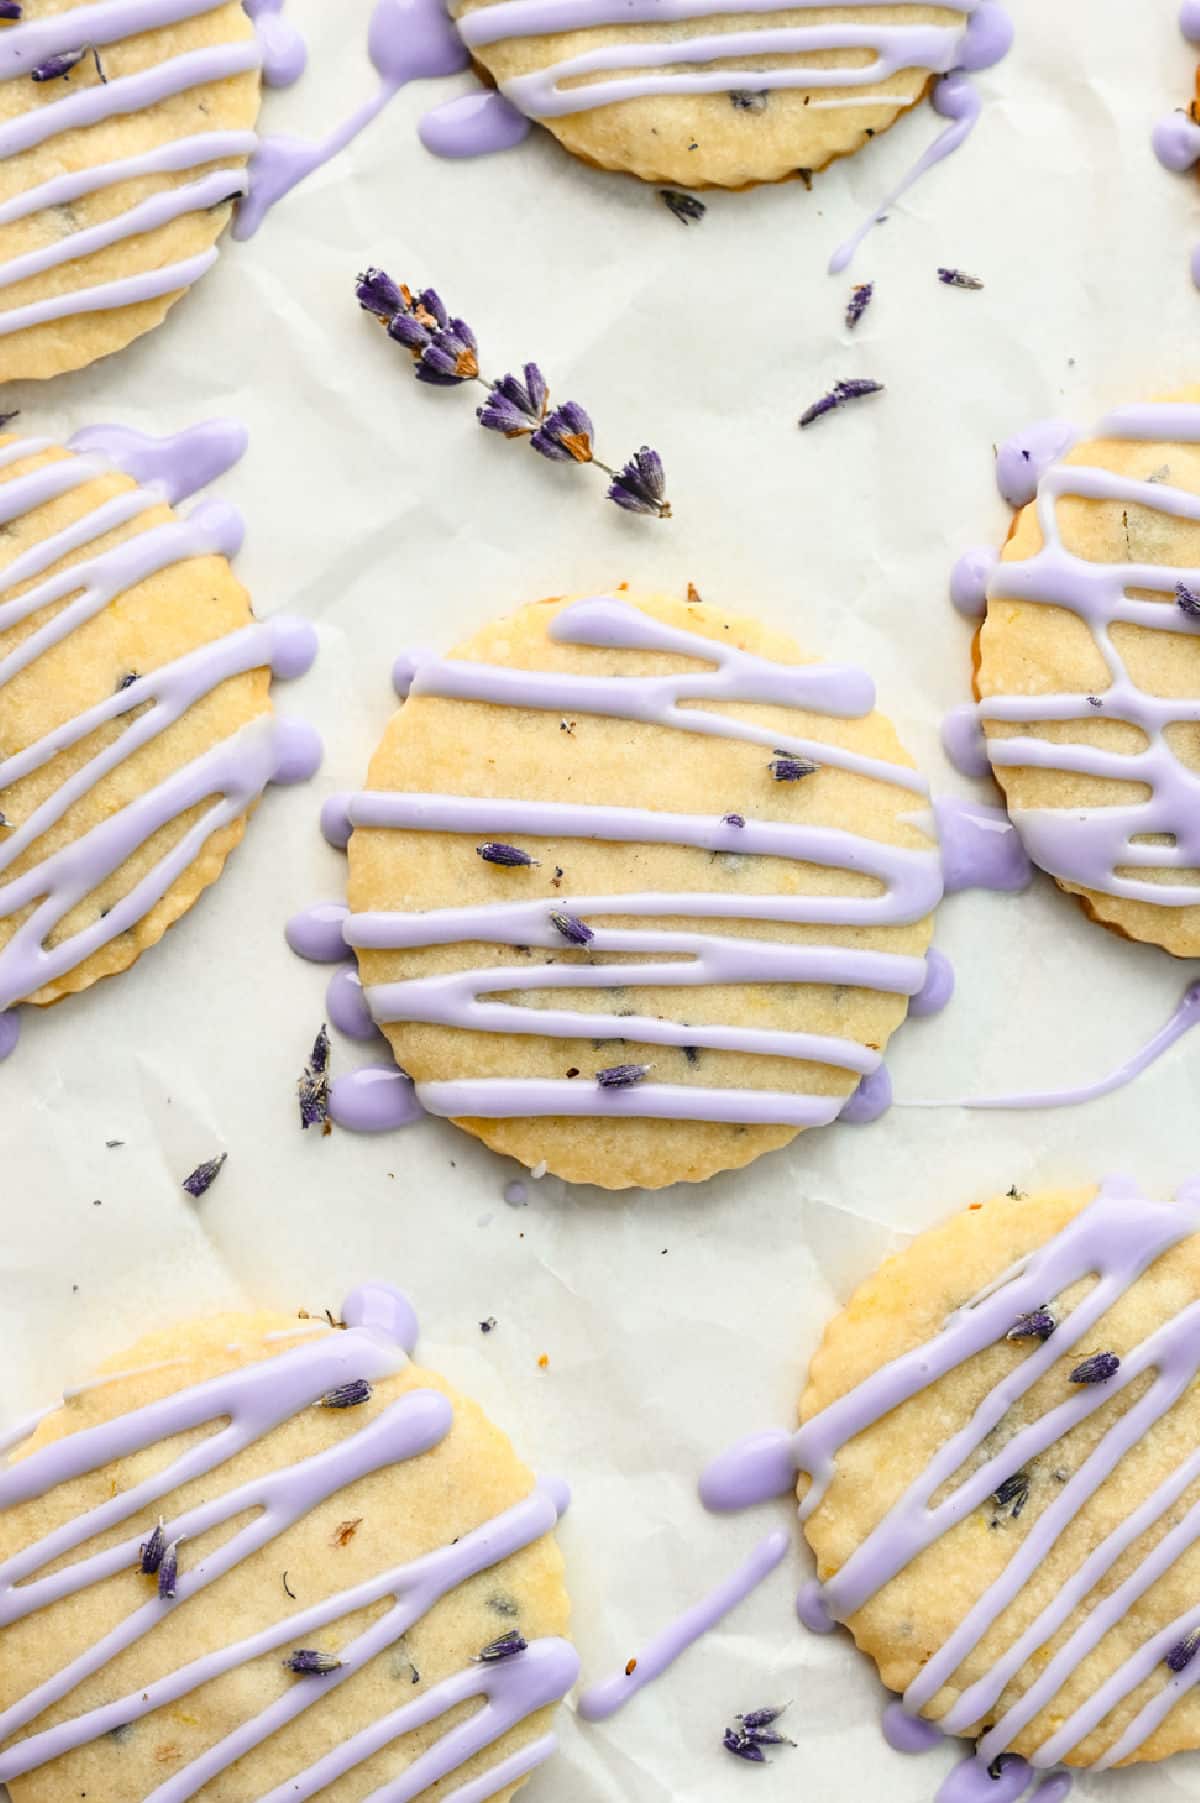 Iced lavender cookies on a piece of parchment paper next to a sprig of lavender.